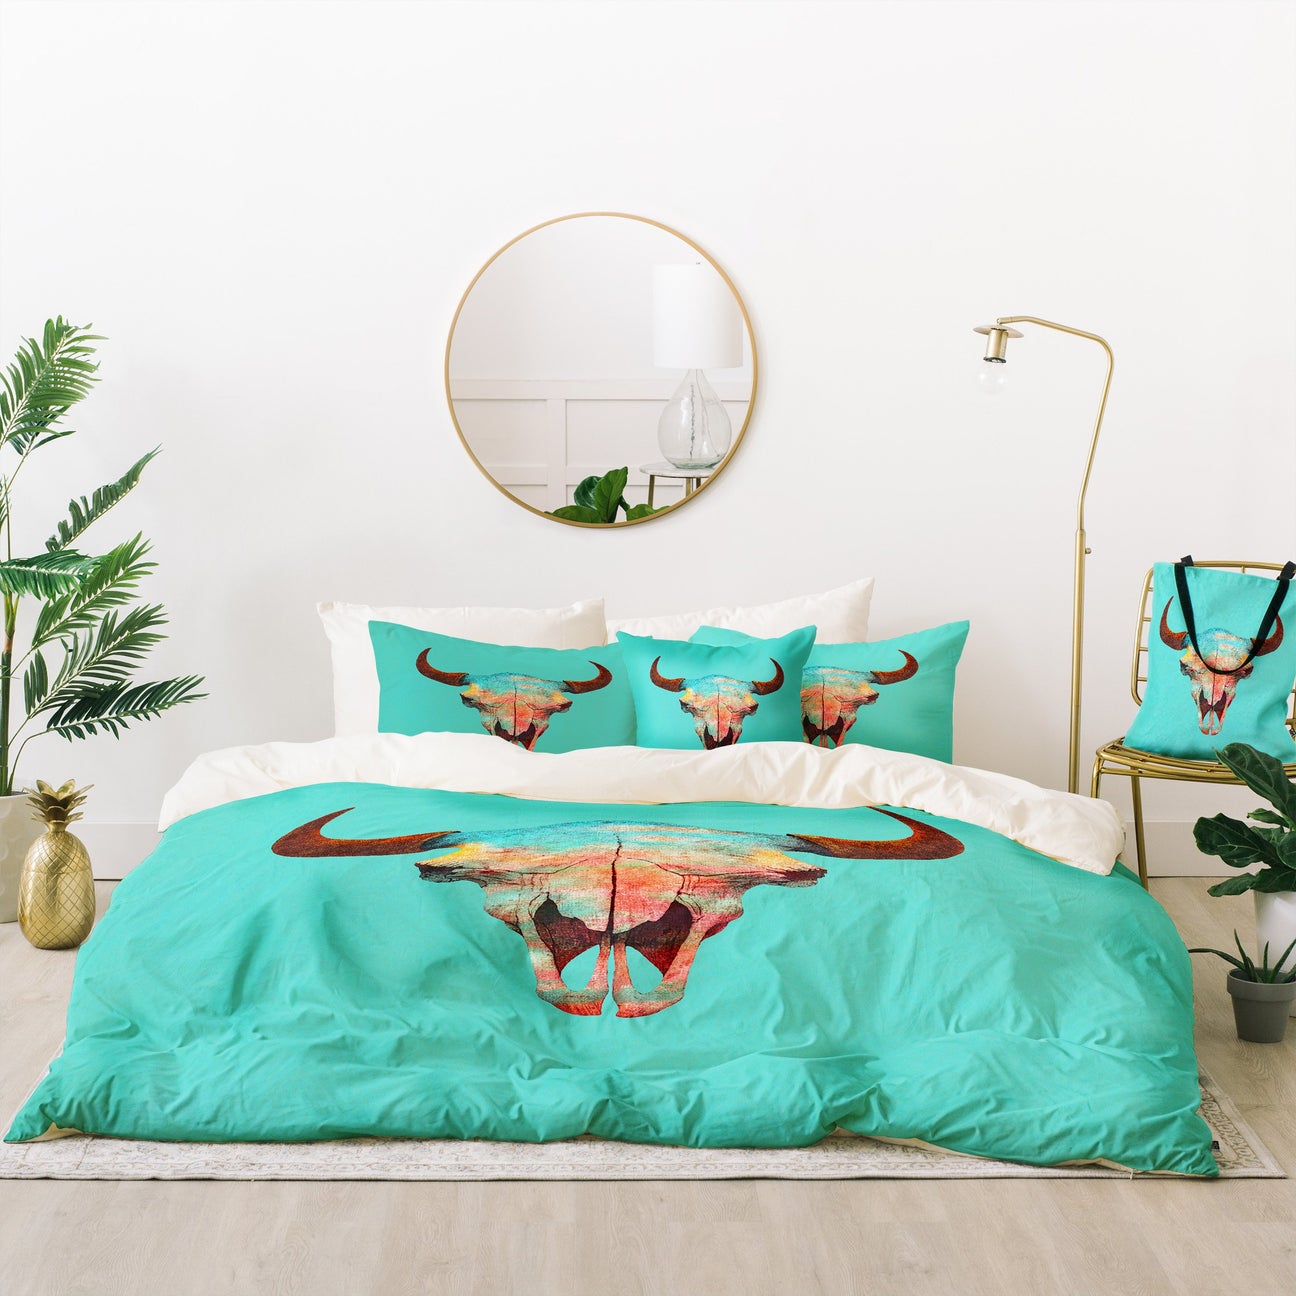 "Ole Turquoise Sky" Duvet Cover (DS)